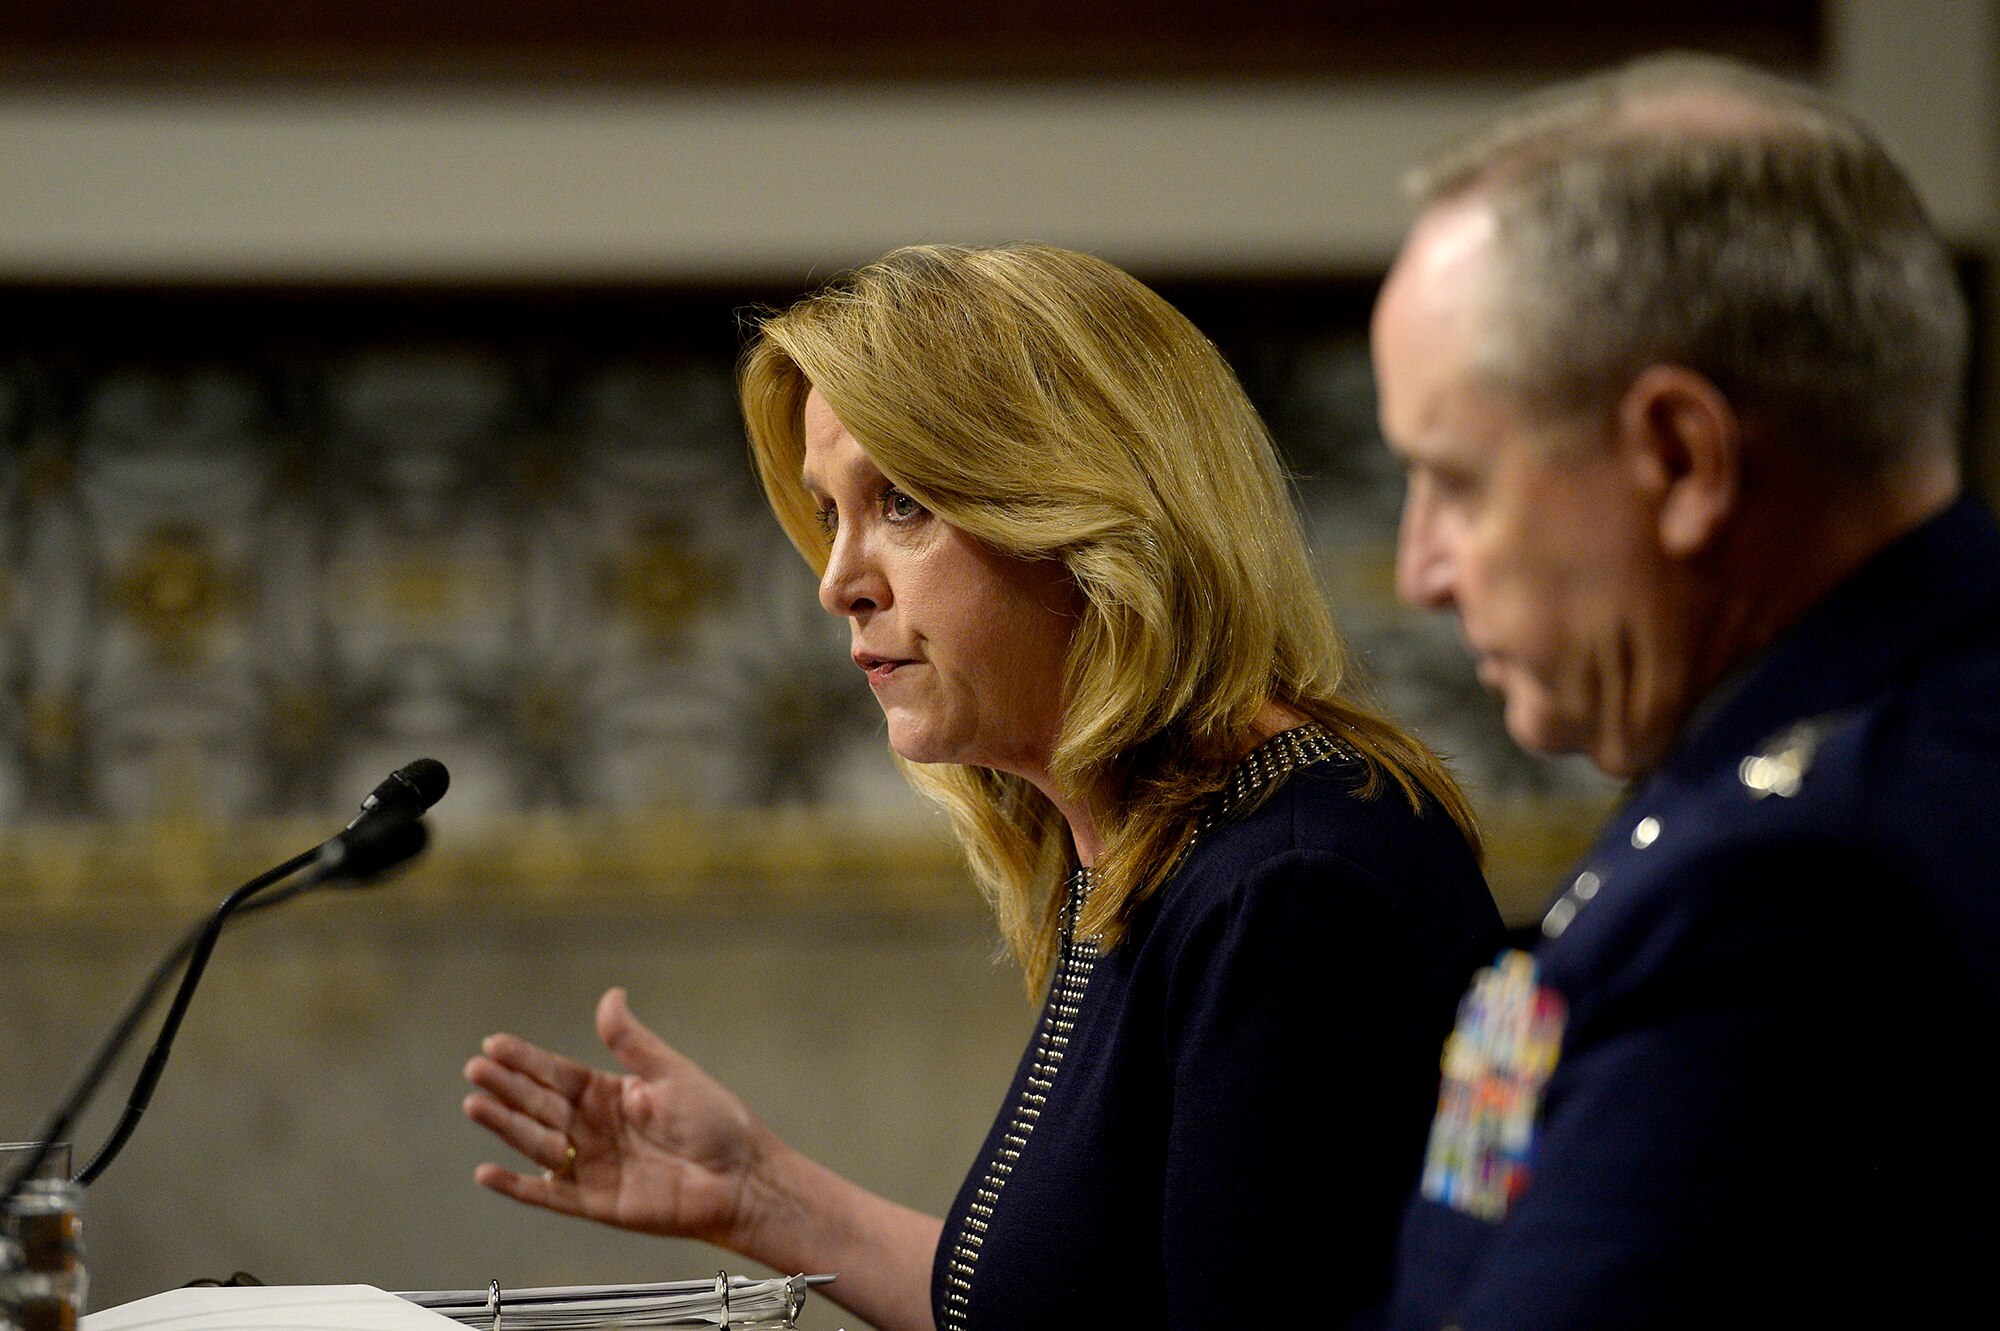 Secretary of the Air Force Deborah Lee James and Air Force Chief of Staff Gen. Mark A. Welsh III testify before the Senate Armed Services Committee on the Air Force posture in Washington, D.C., March 3, 2016. During their comments, the top leaders emphasized the challenges of balancing between budget reductions and maintaining readiness within the service.  (U.S. Air Force photo/Scott M. Ash)      